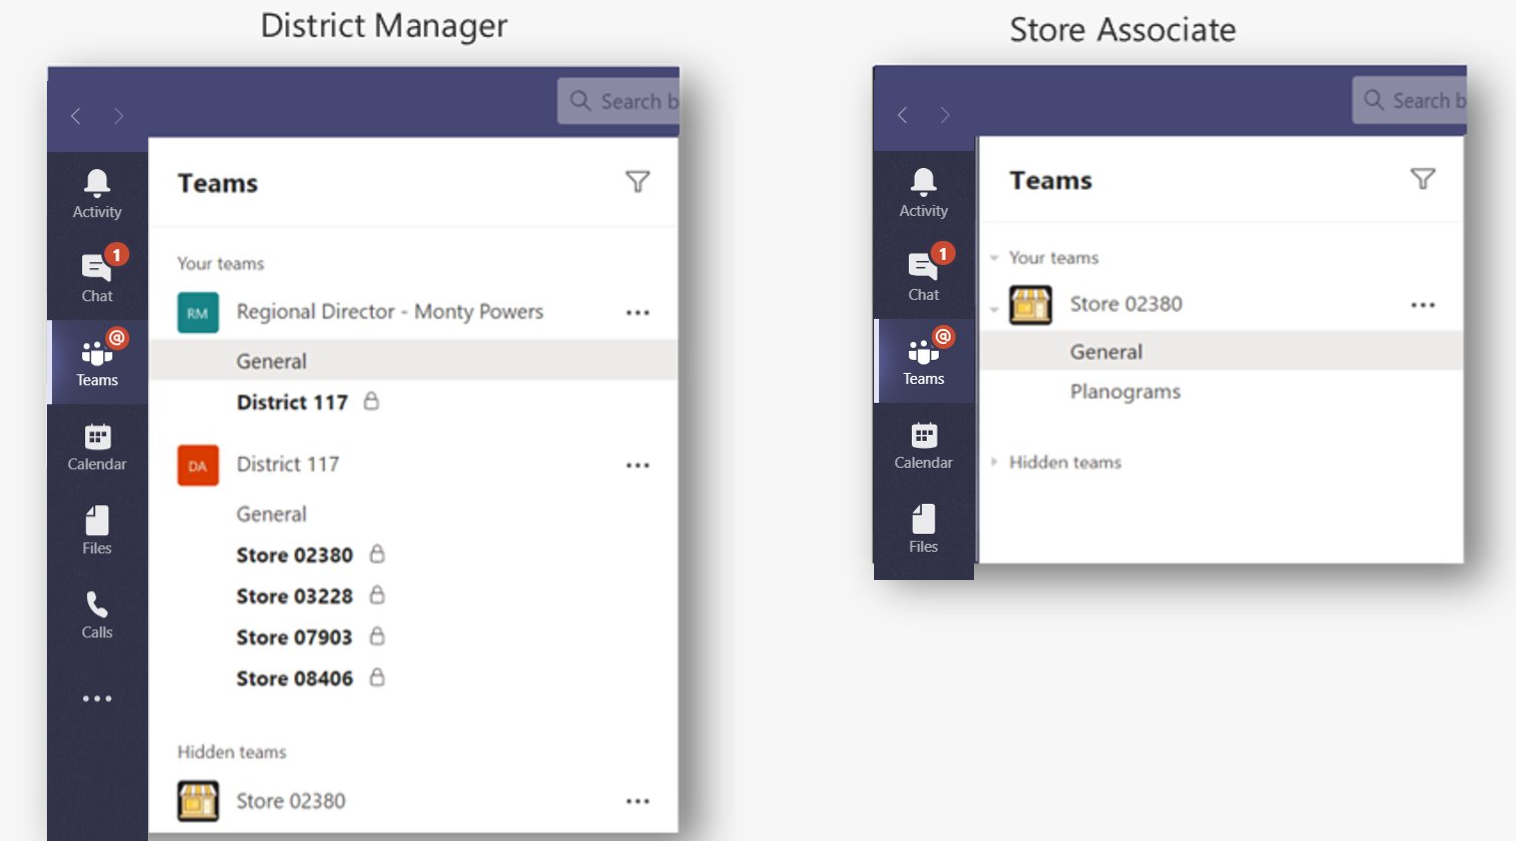 District manager and store associate's interface of Teams channels